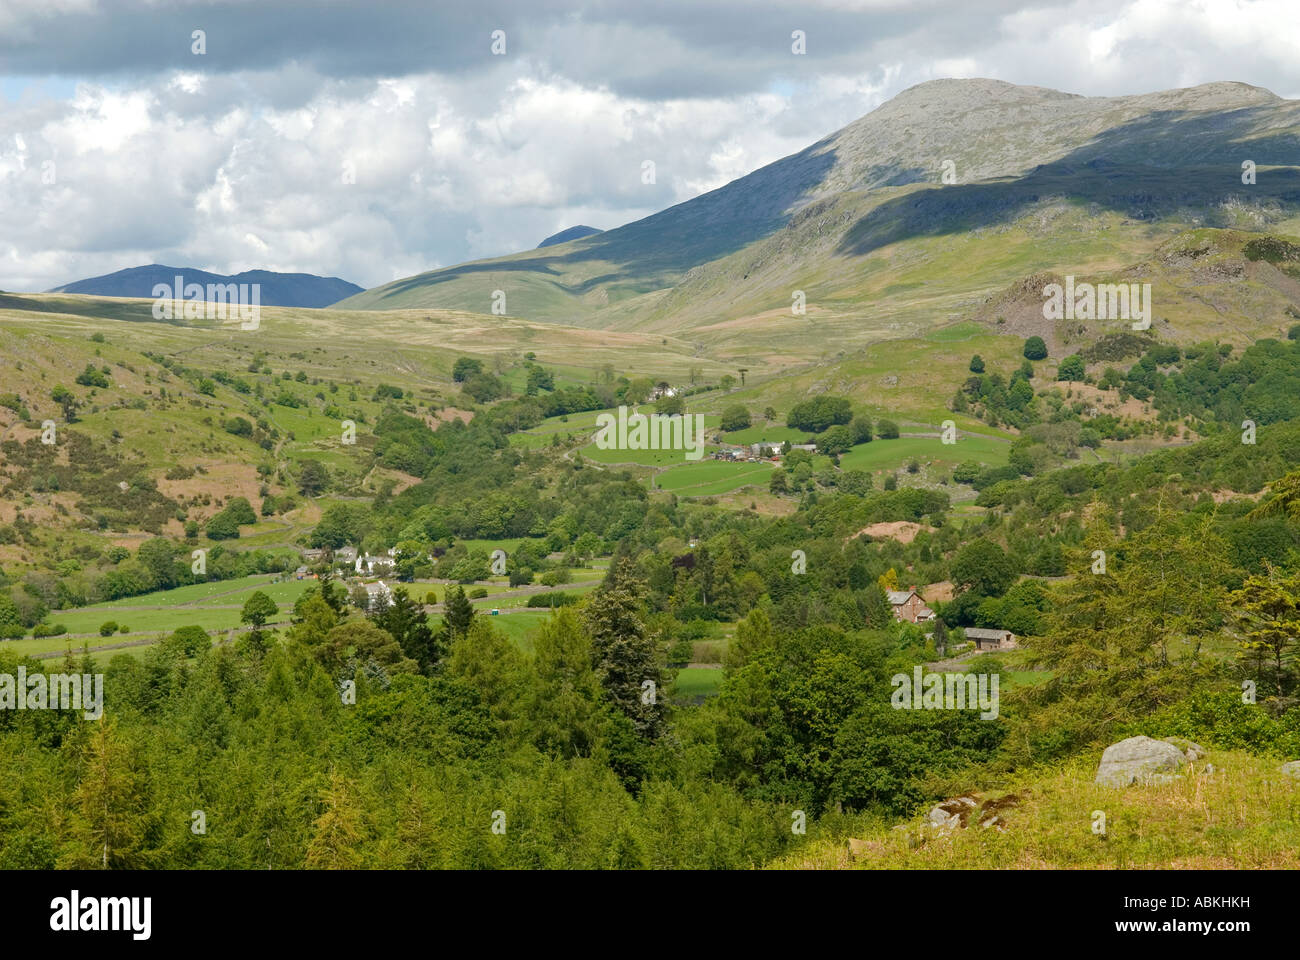 View of Eskdale Valley looking North East towards Hardknott from Stanley Force waterfalls. Stock Photo